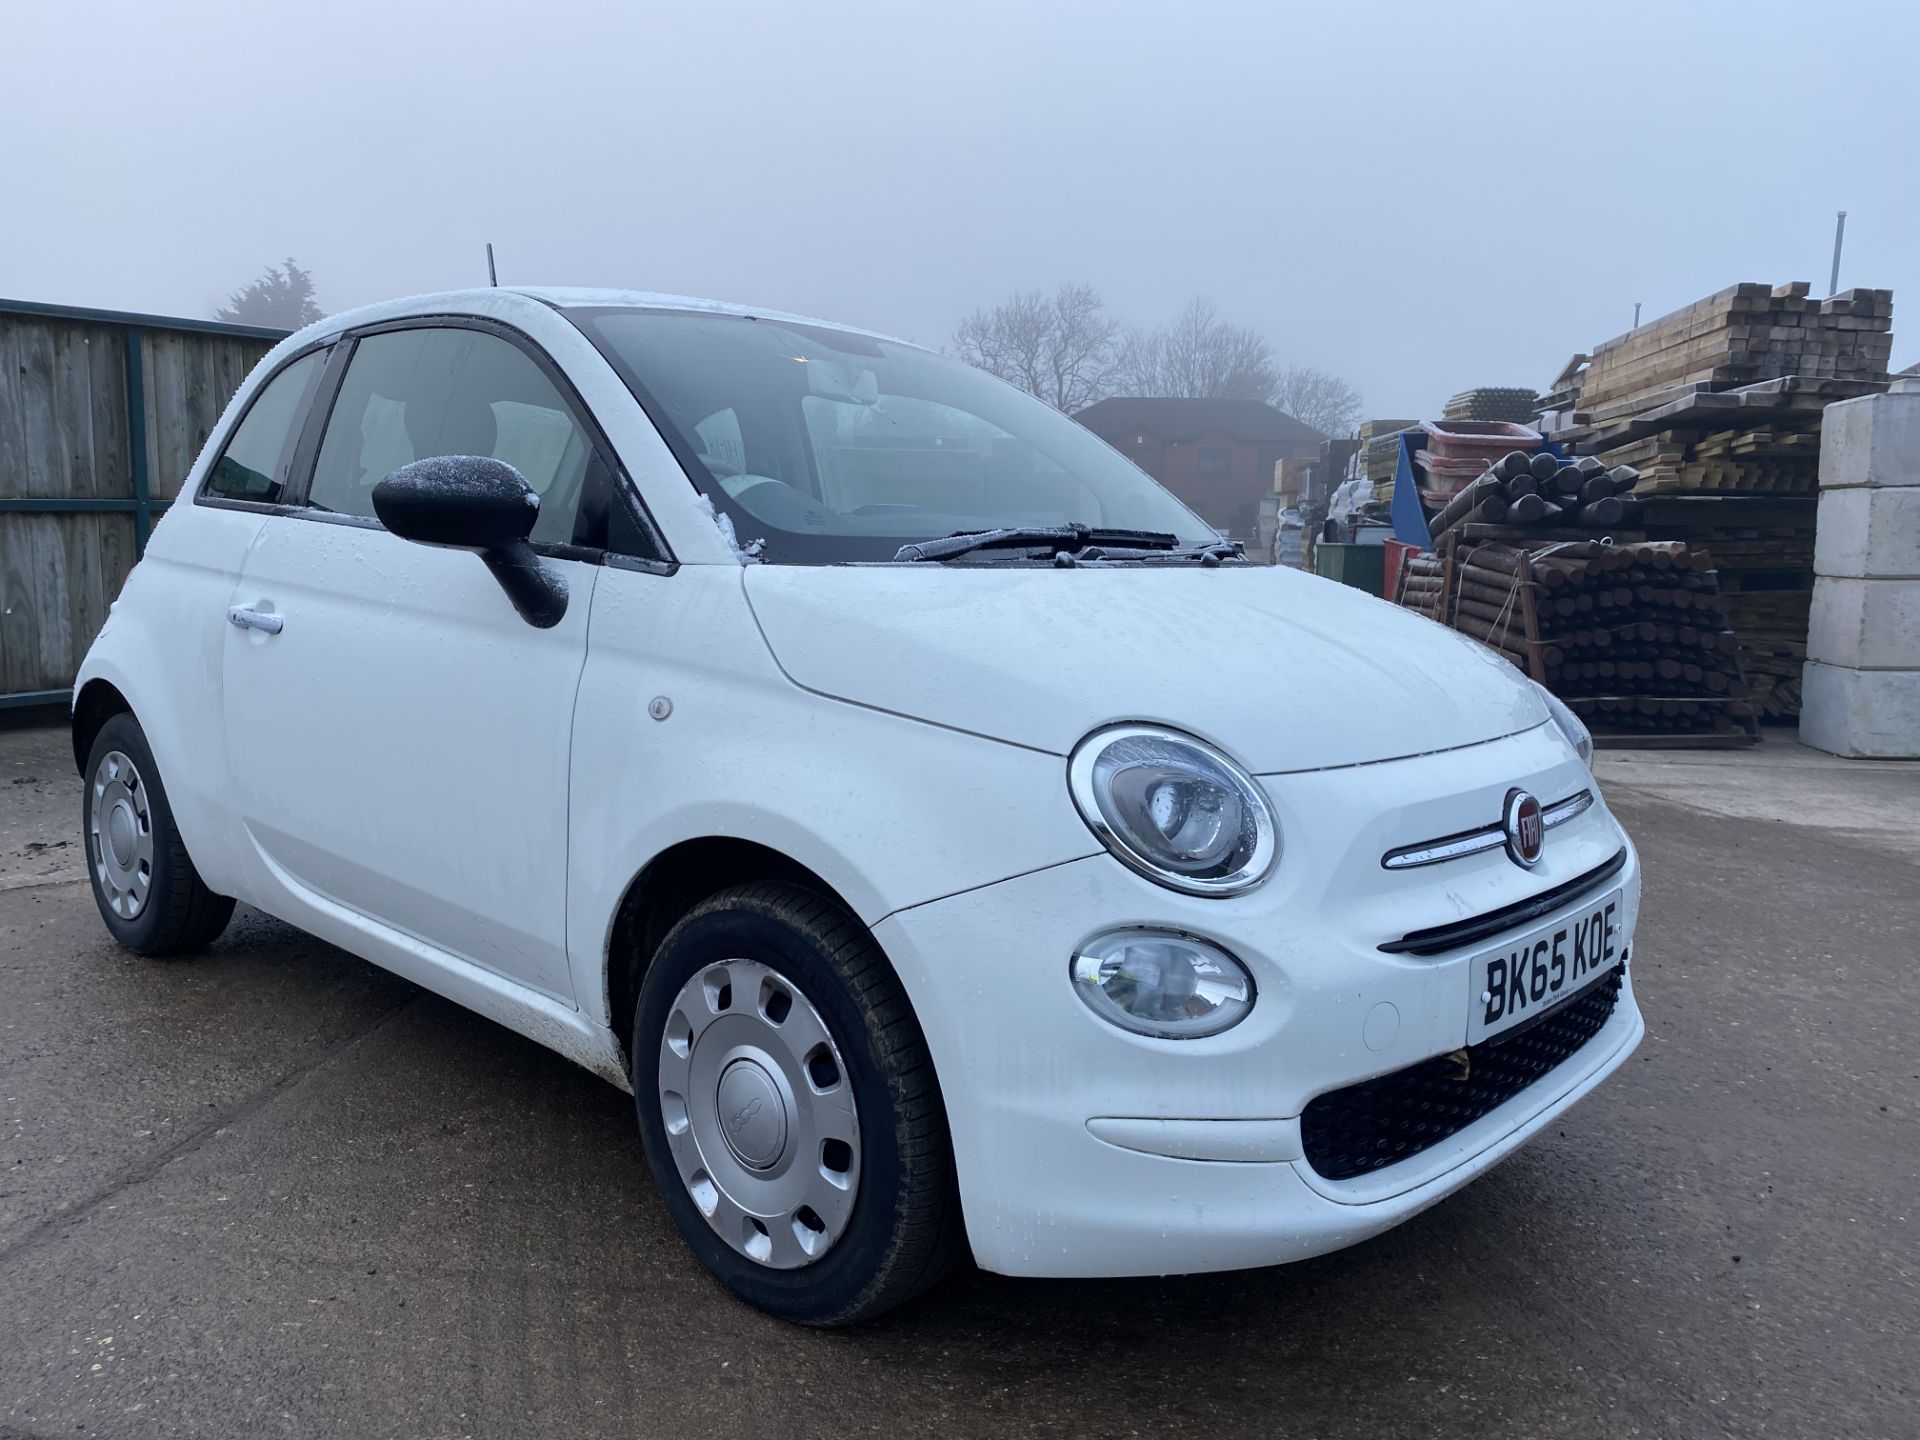 On Sale FIAT 500 "POP" 1.2 PETROL - 2016 MODEL - 1 KEEPER - ONLY 44K MILES FROM NEW - AIR CON - LOOK